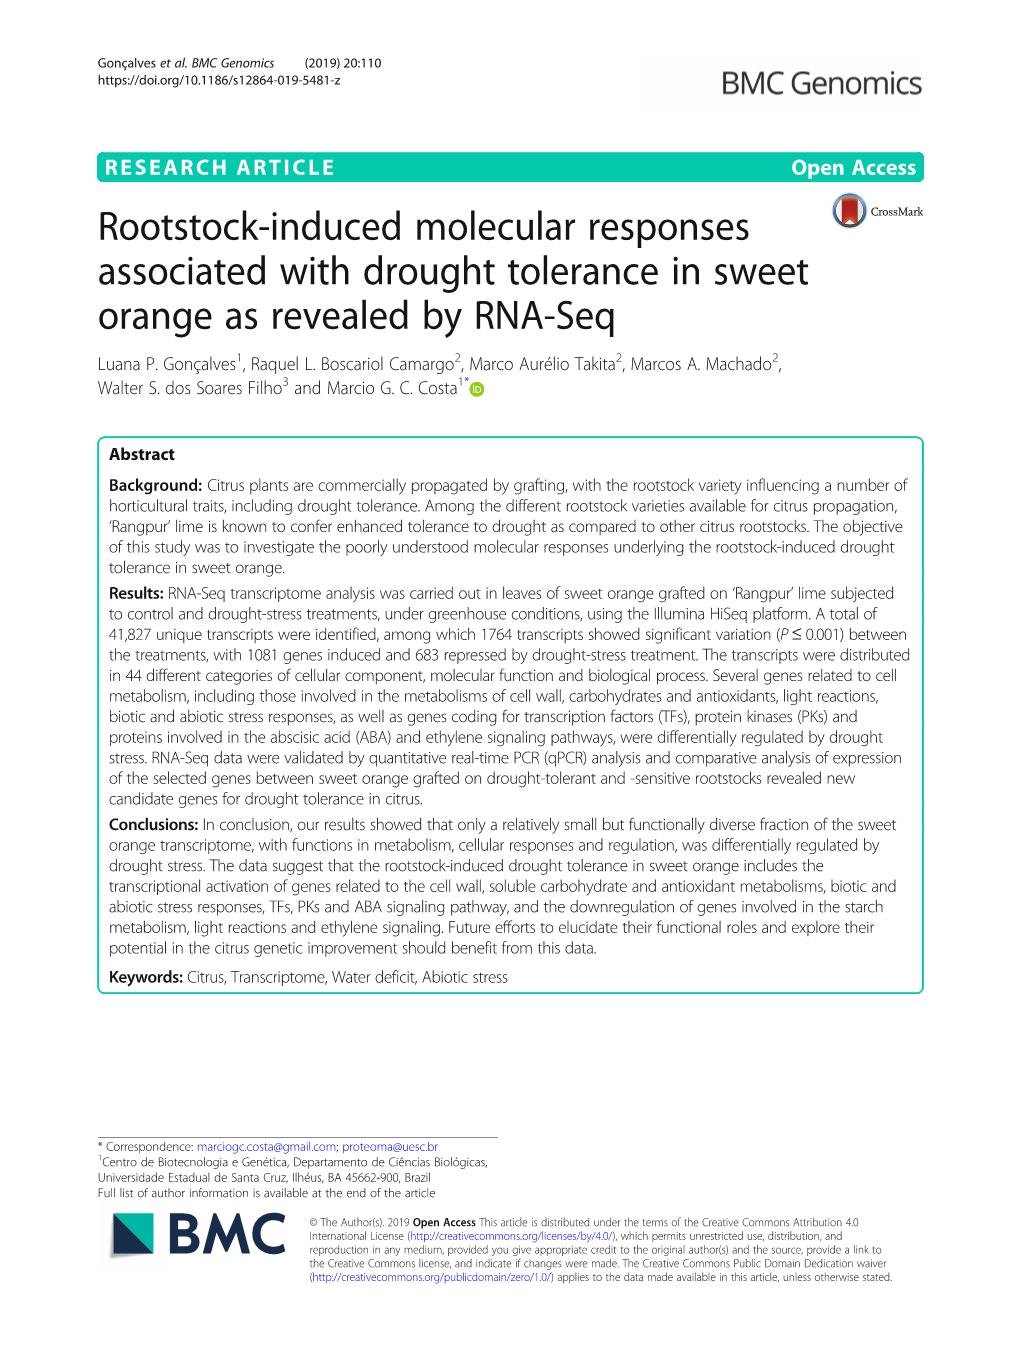 Rootstock-Induced Molecular Responses Associated with Drought Tolerance in Sweet Orange As Revealed by RNA-Seq Luana P